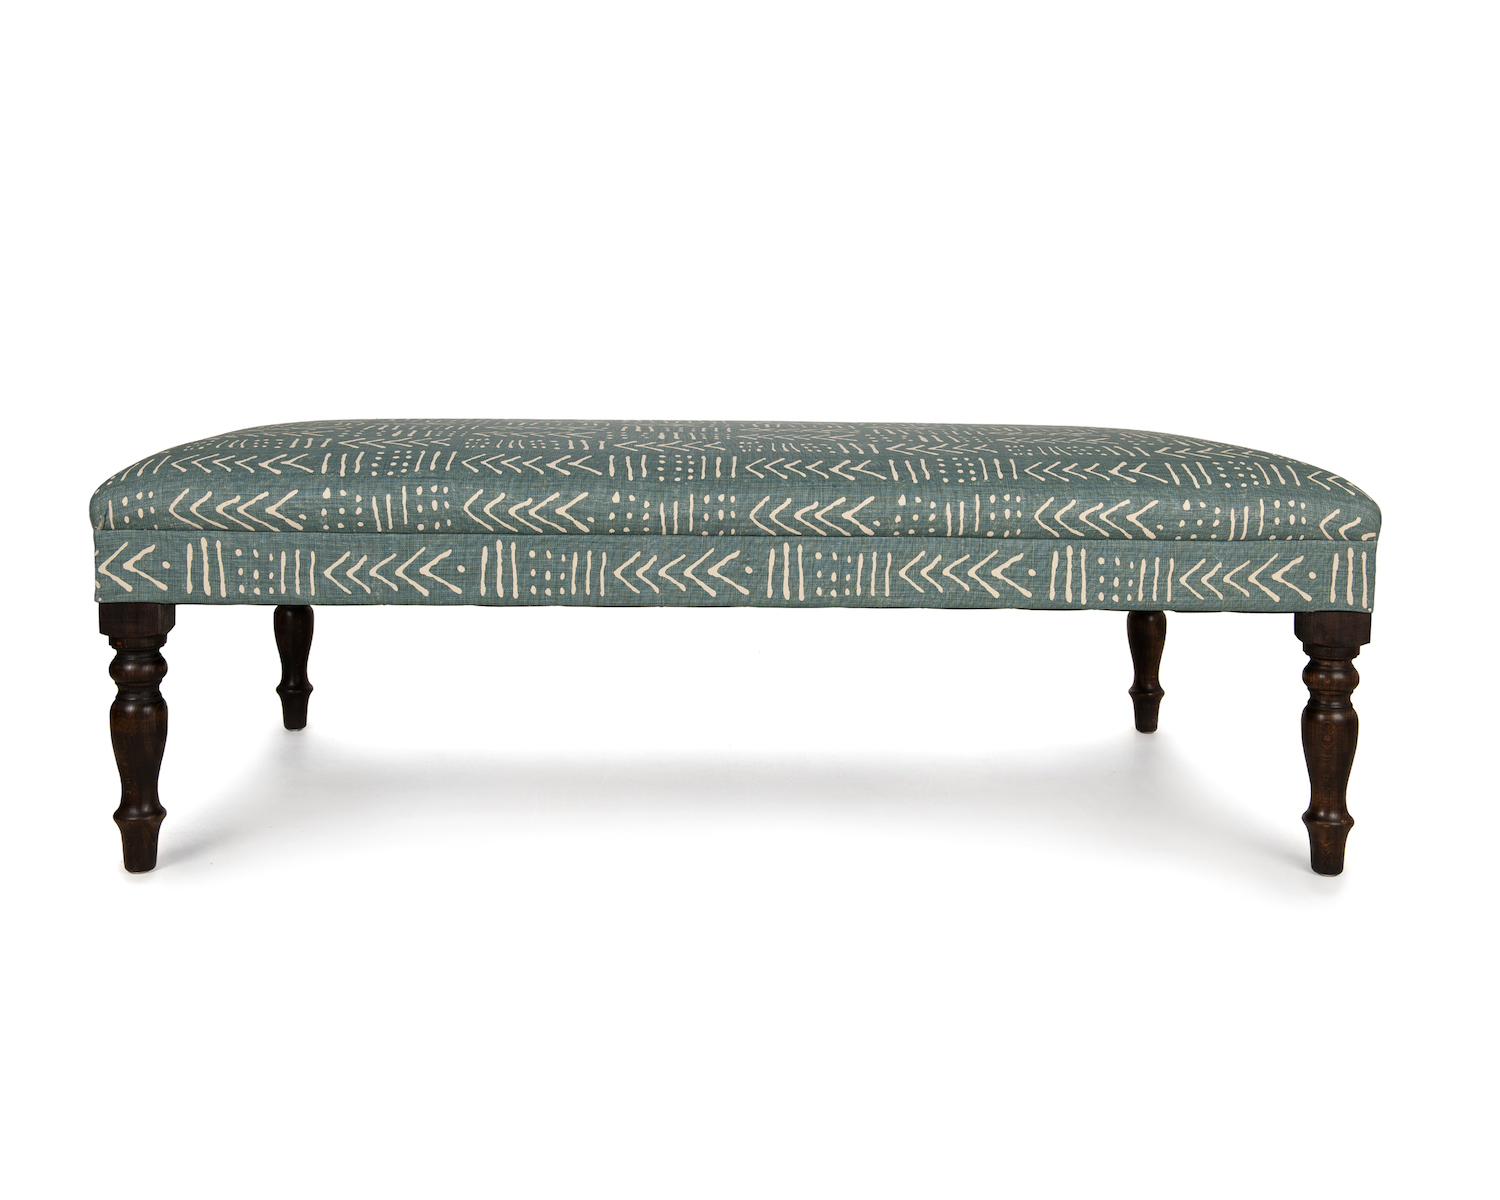 Narrow Roll Top Footstool with Running Border